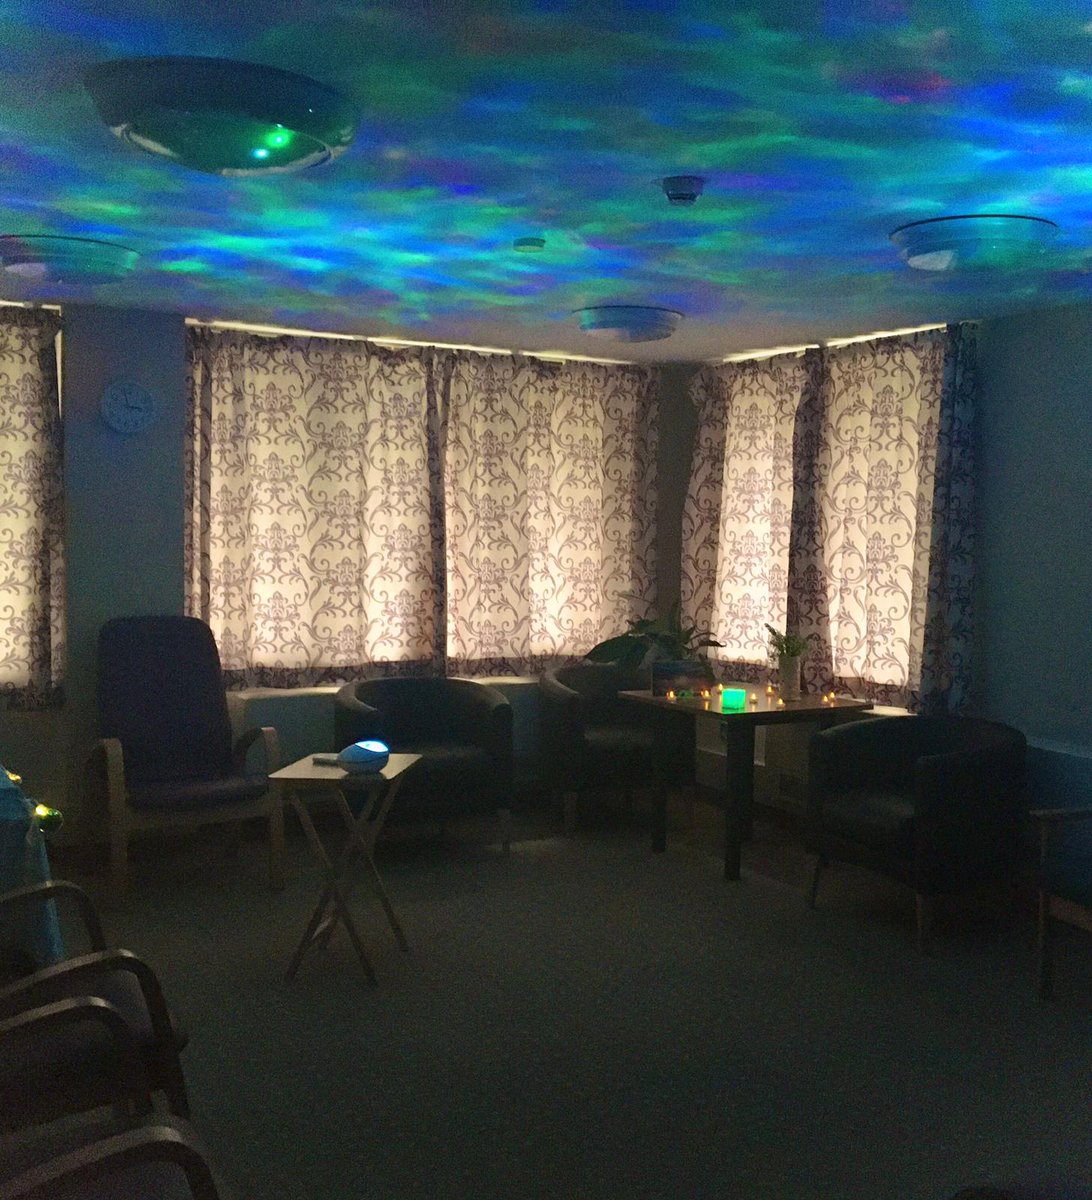 Room set for relaxation session at woodlands today. Led by our activity workers. #relax @HCusdin @AbbeyWa03666069 @castle_ward